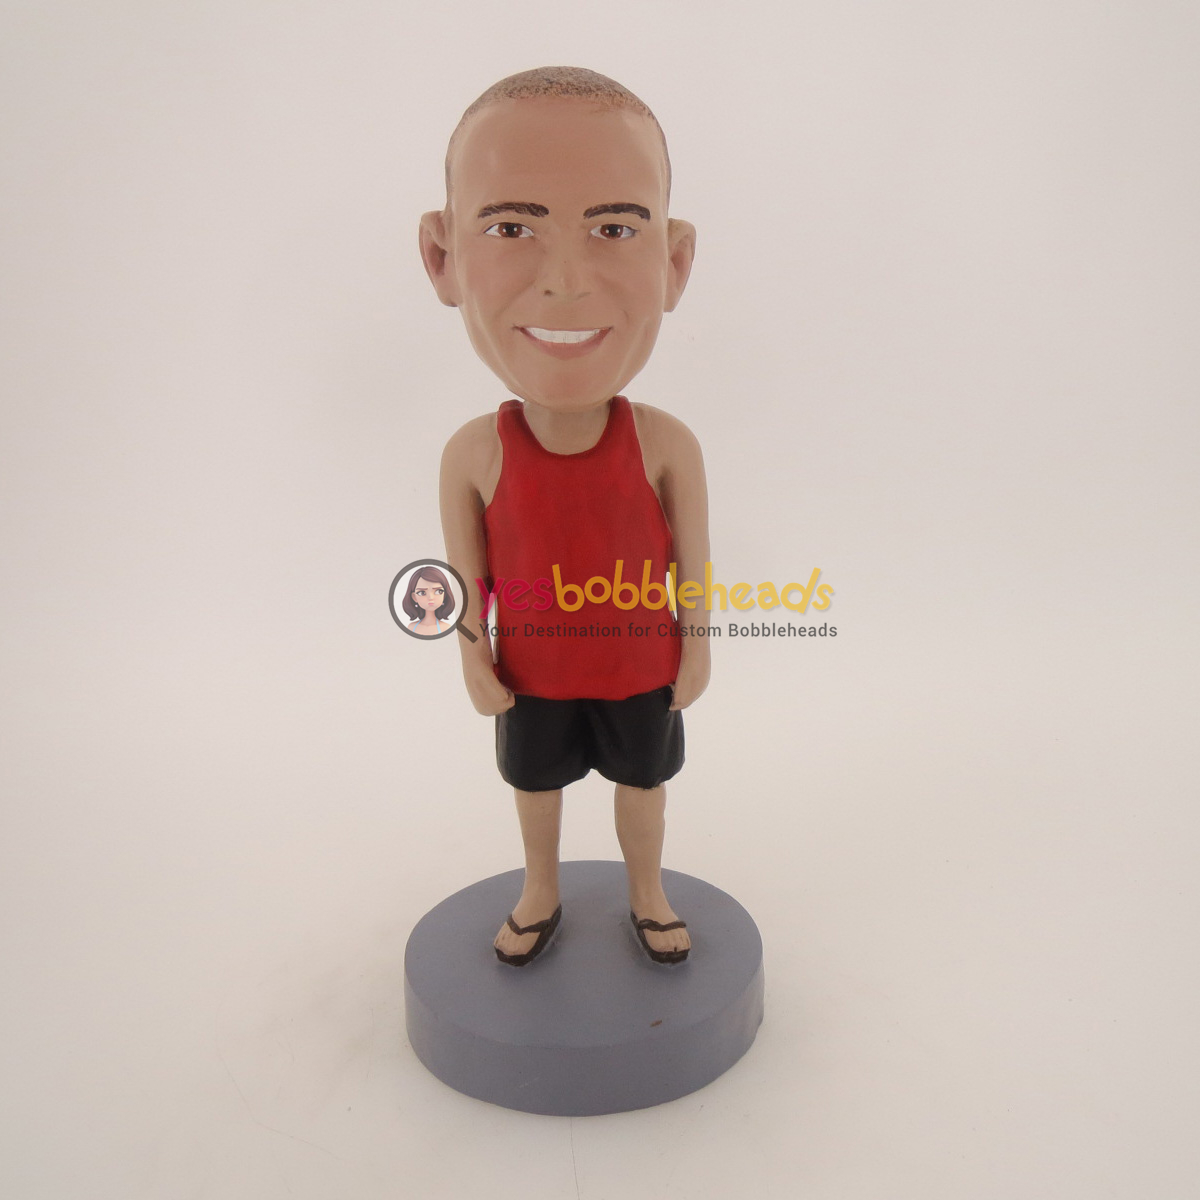 Picture of Custom Bobblehead Doll: Casual Man In Red Shirt